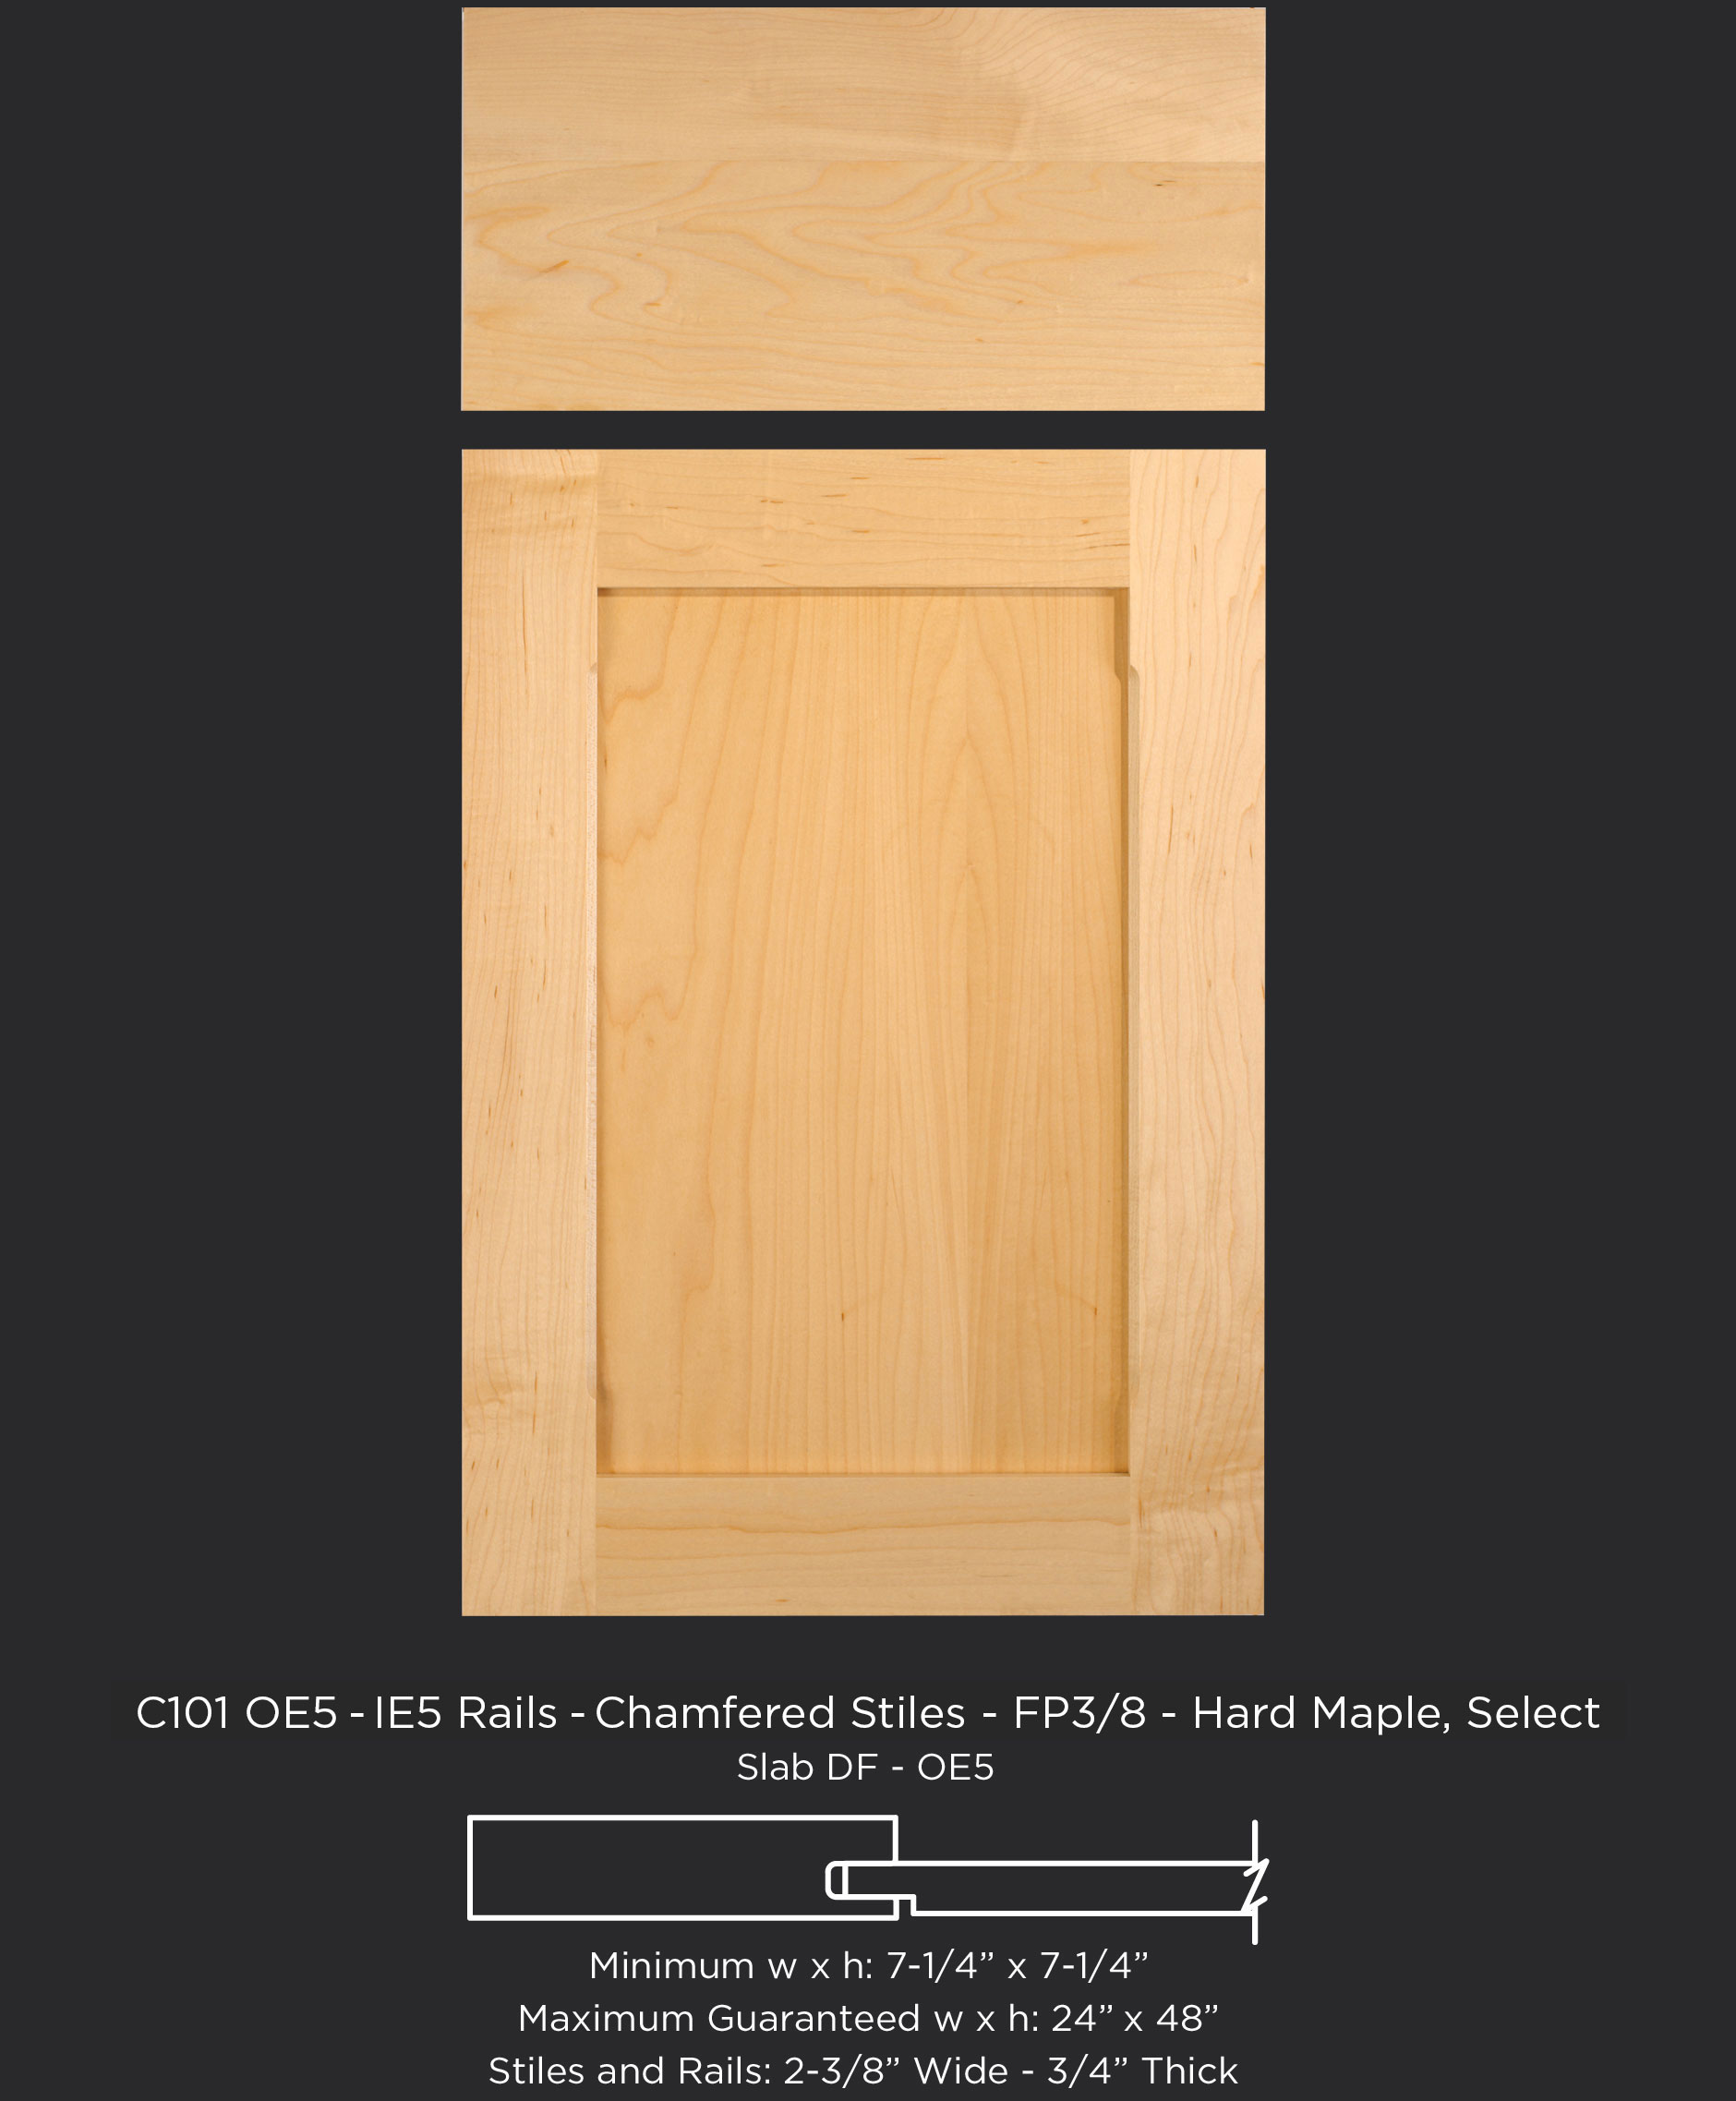 C101 Oe5 Ie5 Rails Fp3 8 Chamfered Stiles Hard Maple Select